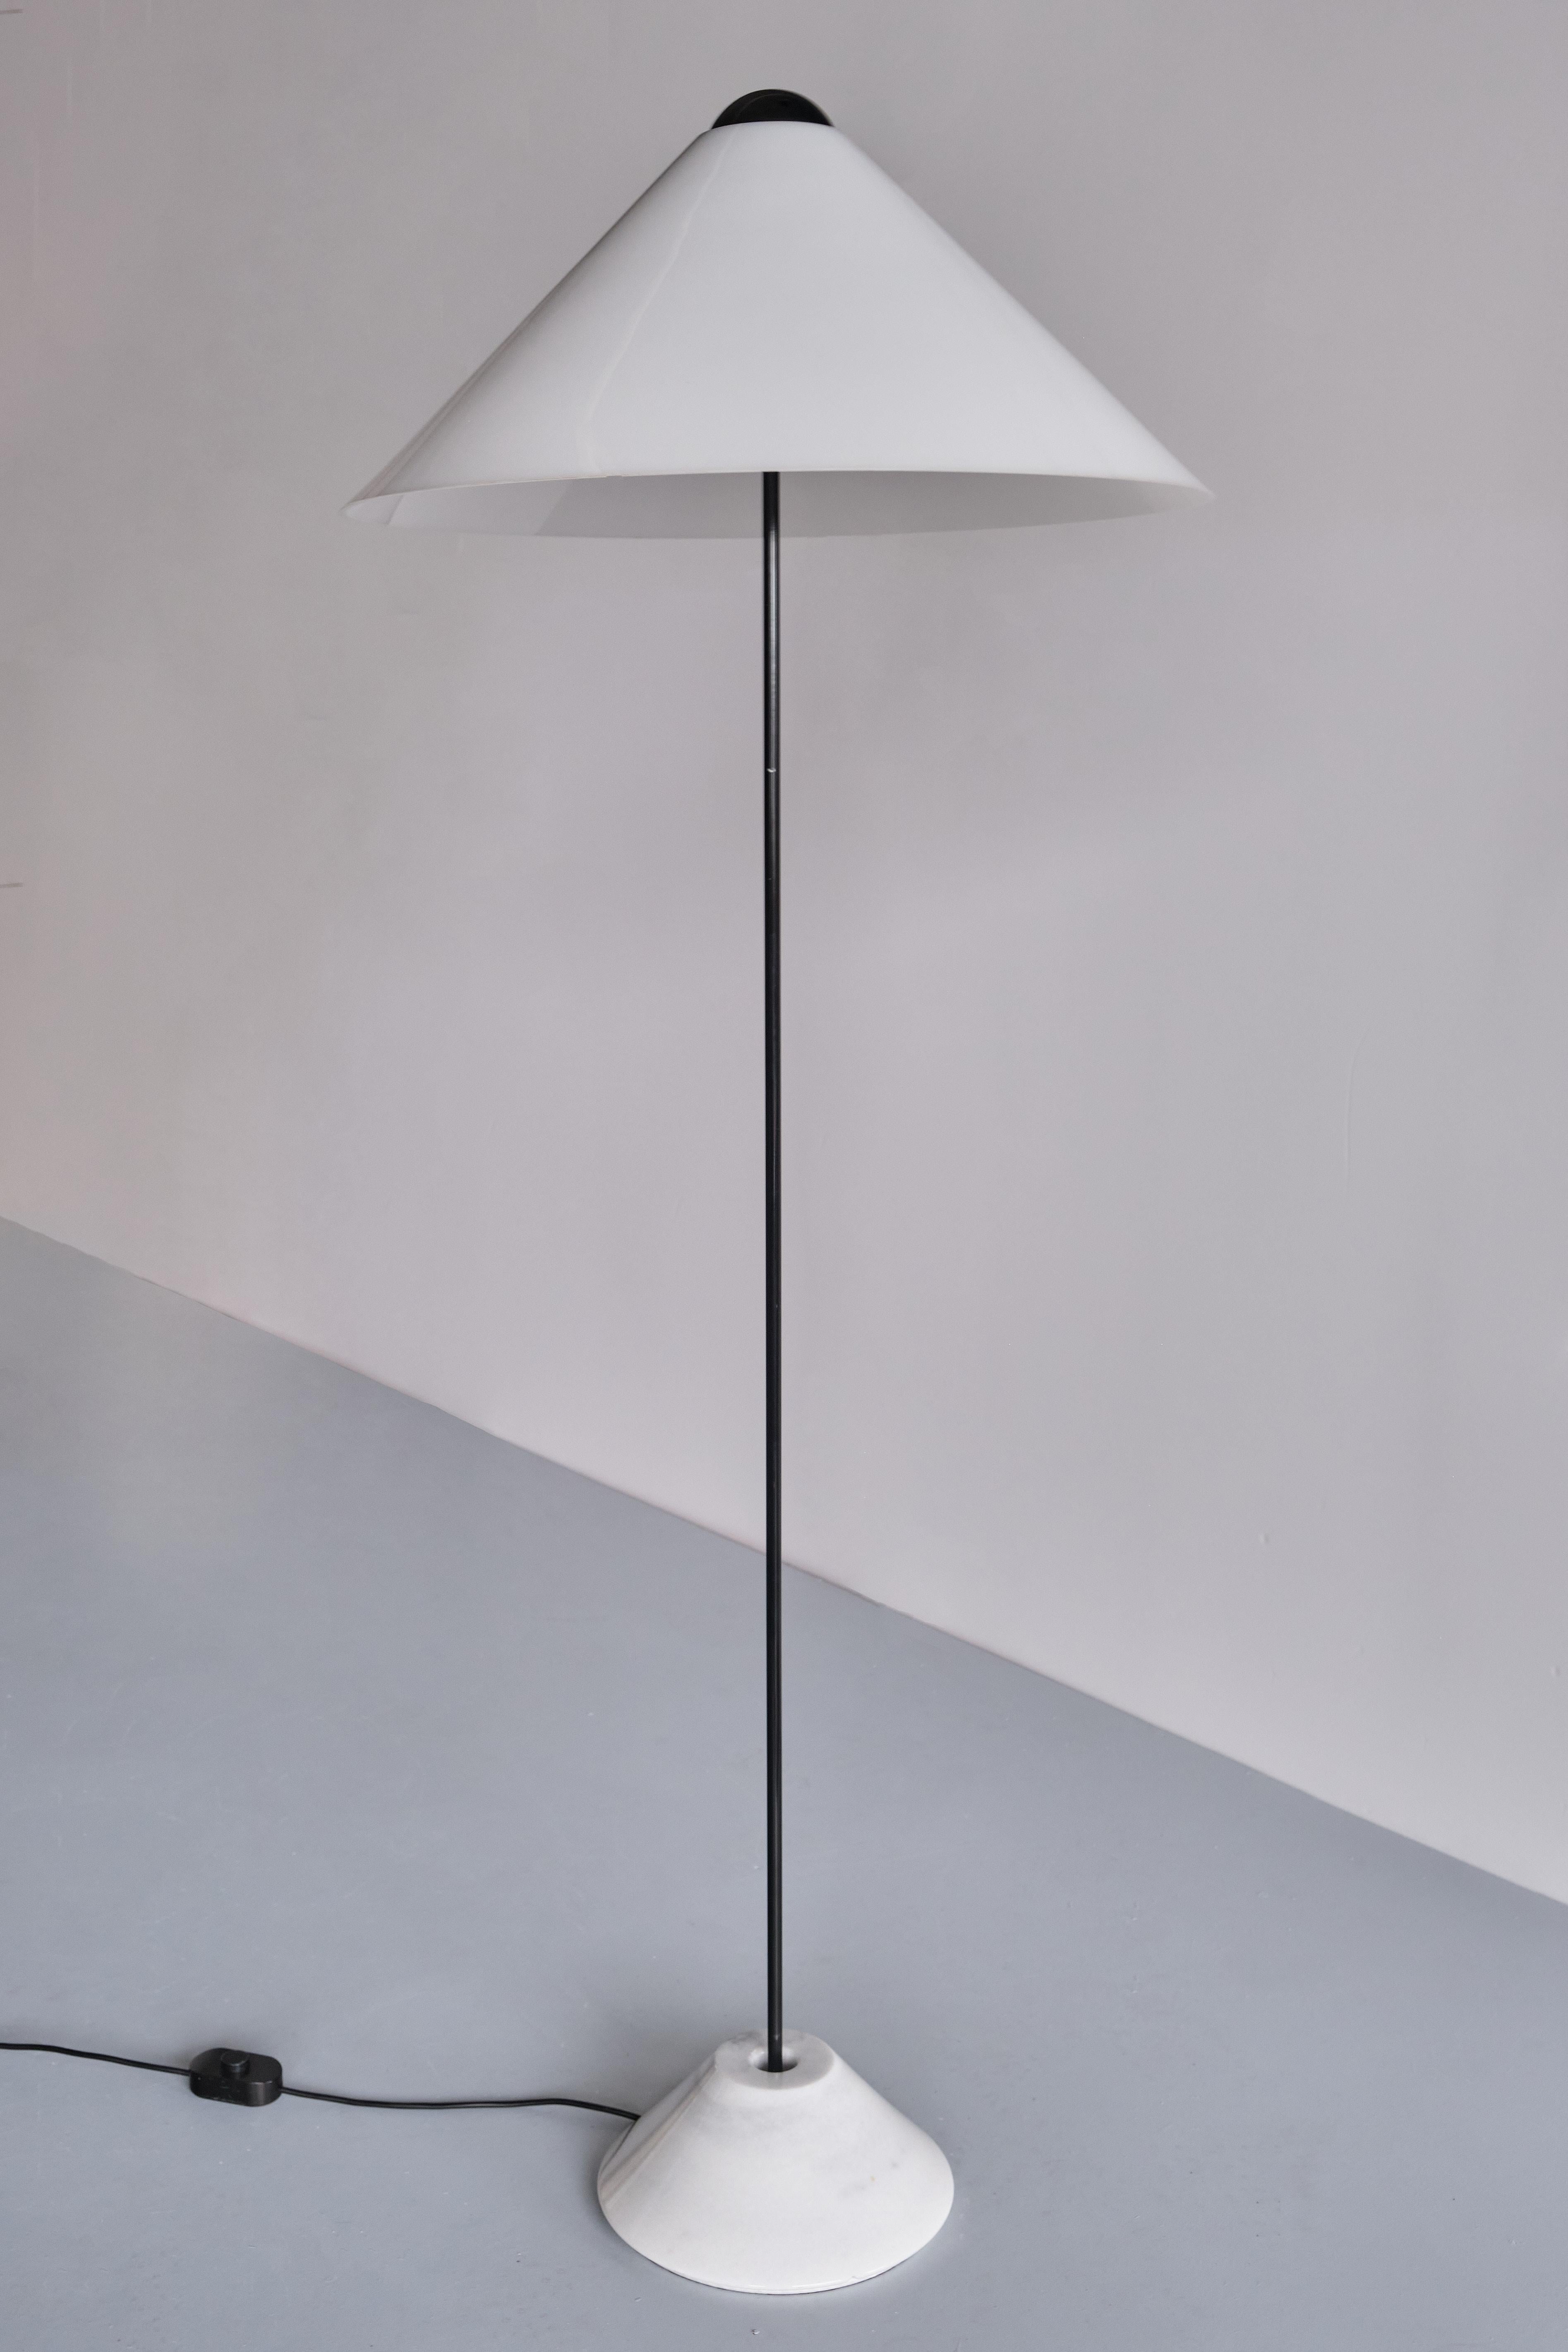 Late 20th Century Vico Magistretti 'Snow' Floor Lamp in Metal and Marble, Oluce, Italy, 1973 For Sale